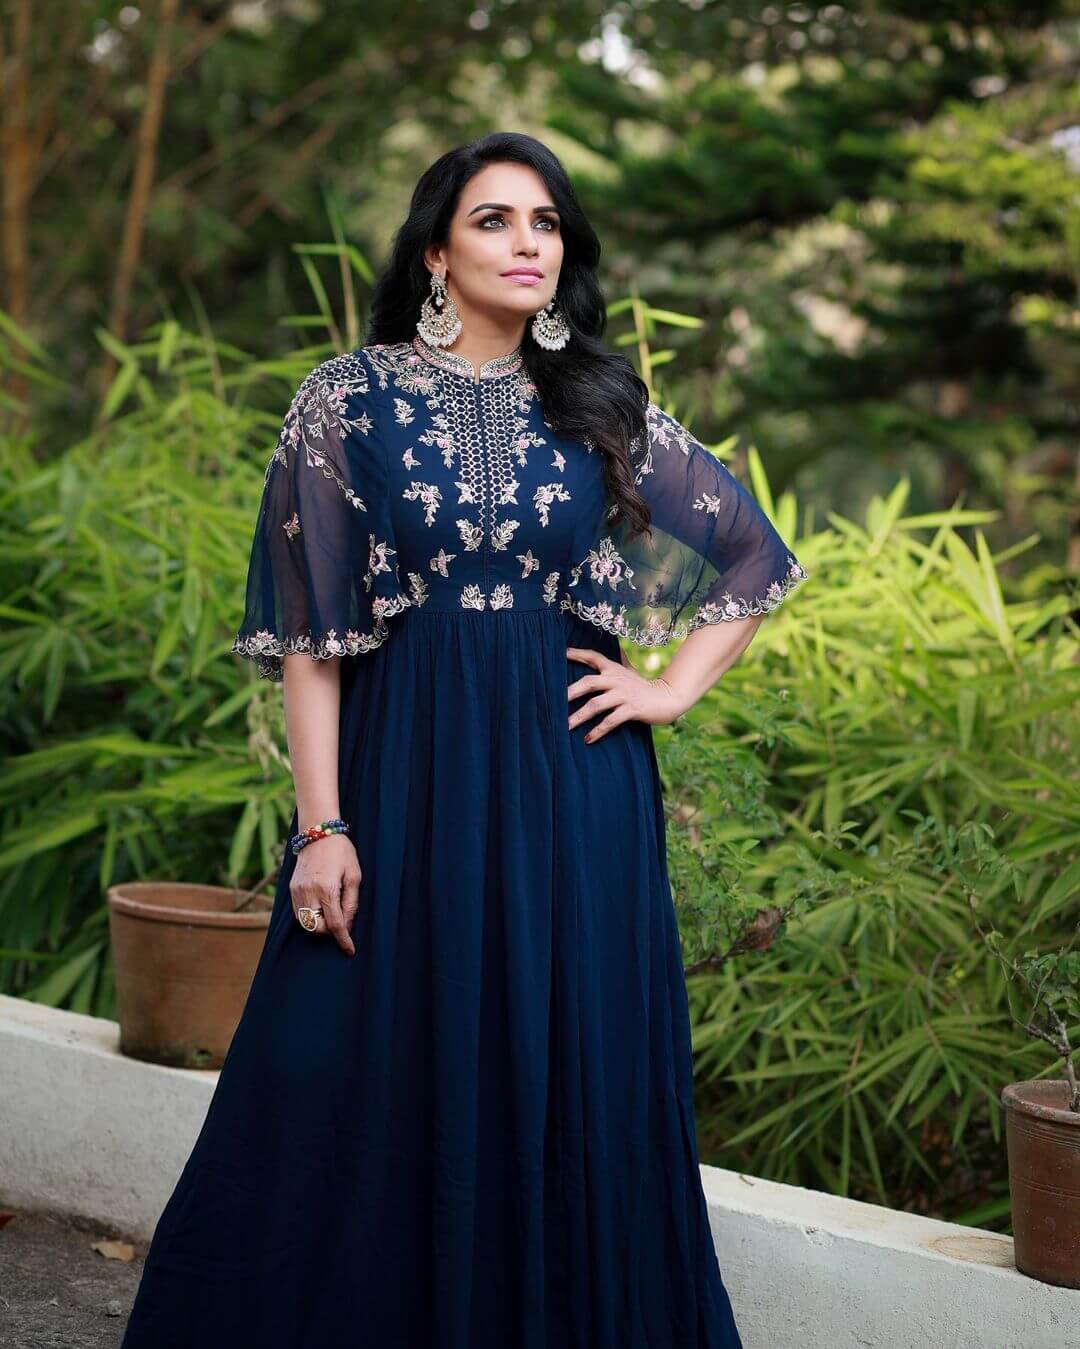 Shwetha Menon Strike A Pose In Blue Flare Gown With Kimono Sleeves